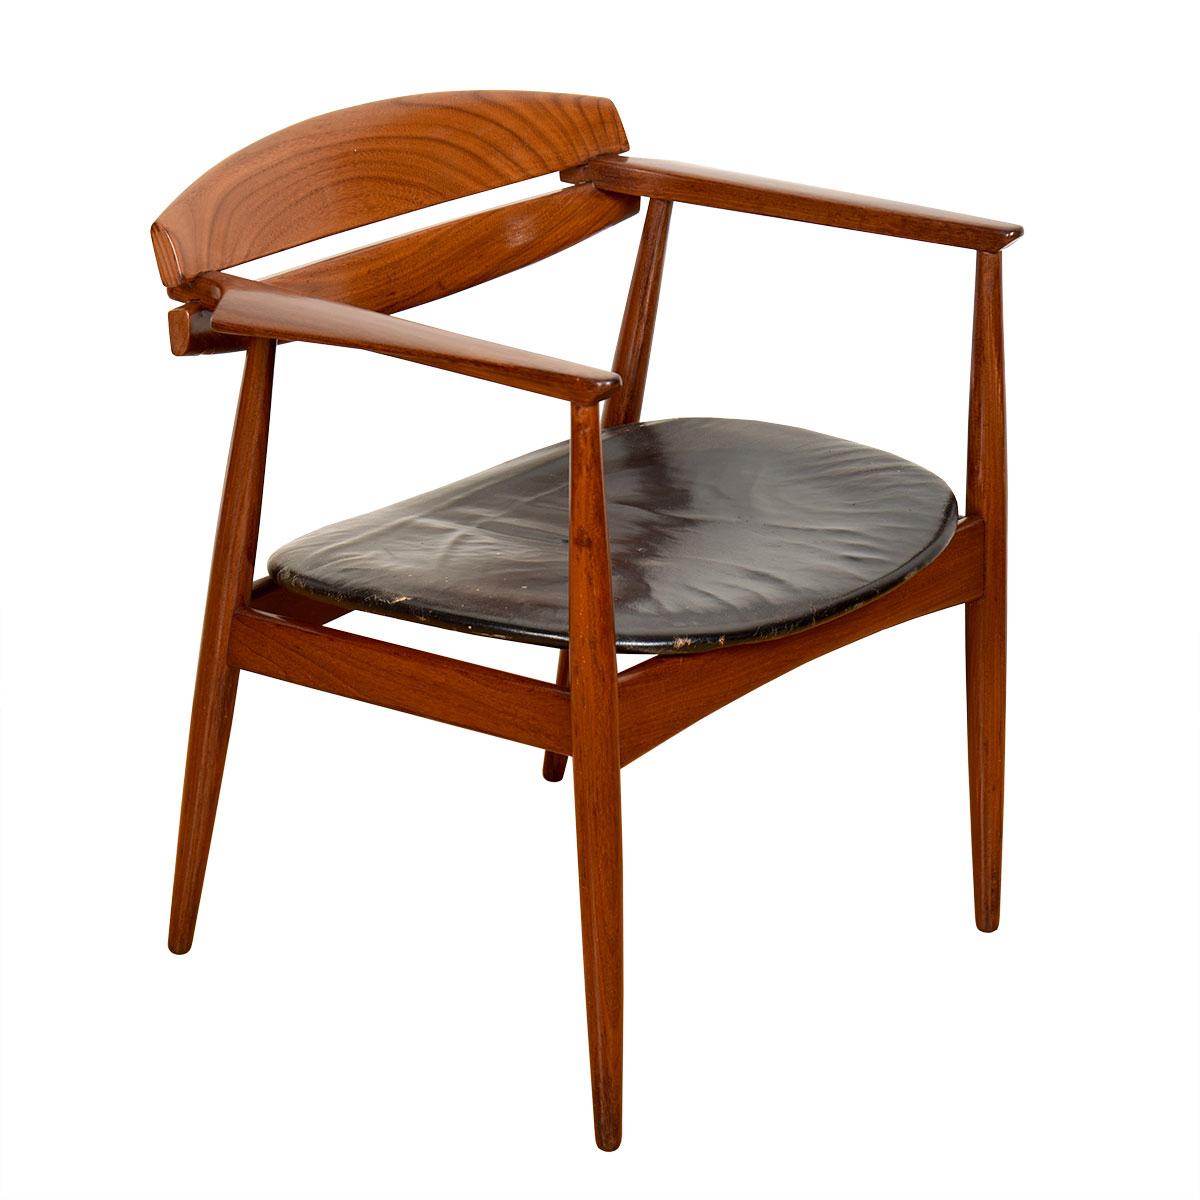 Excellent and scarce armchair by Jorgen Matz and John Sylvester for Bramin of Denmark. 1959 design. Made of afromasia (in the rosewood family) and leather. Lovely sculpted arms and cantilevered joinery where the arms go through the back. Nice wide